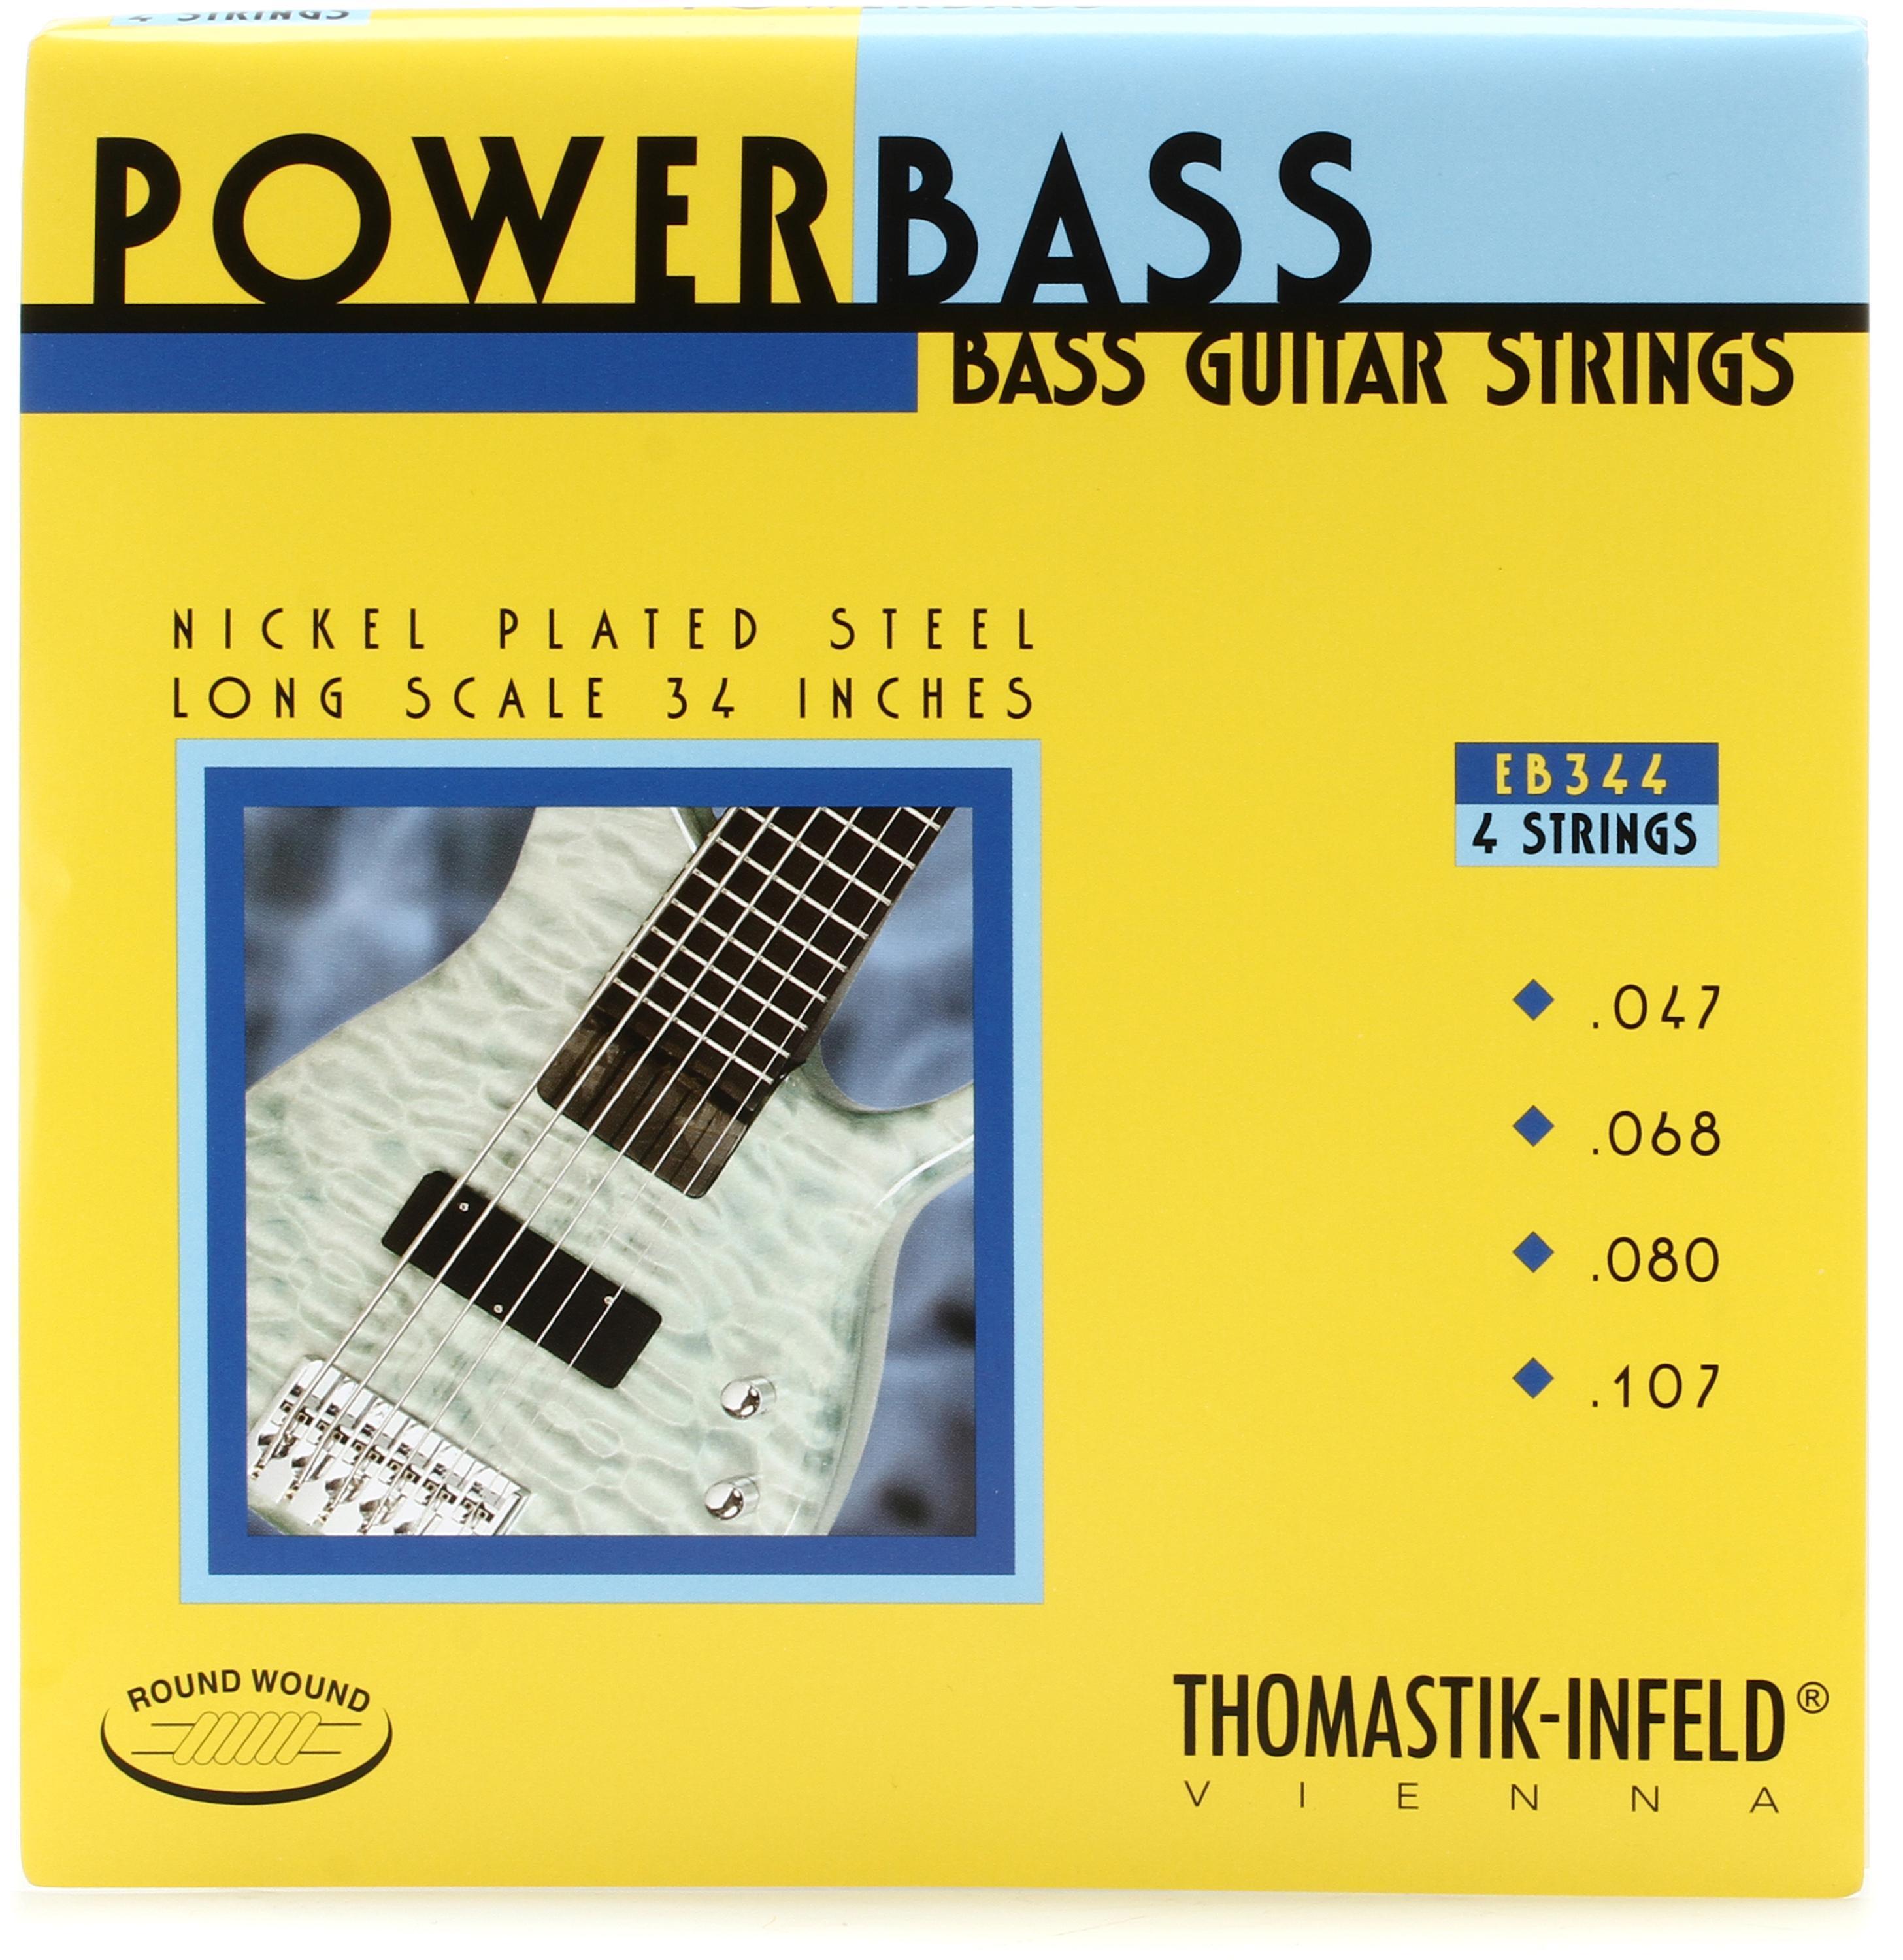 BALANCED Series – Electric bass nickel plated steel on stainless steel